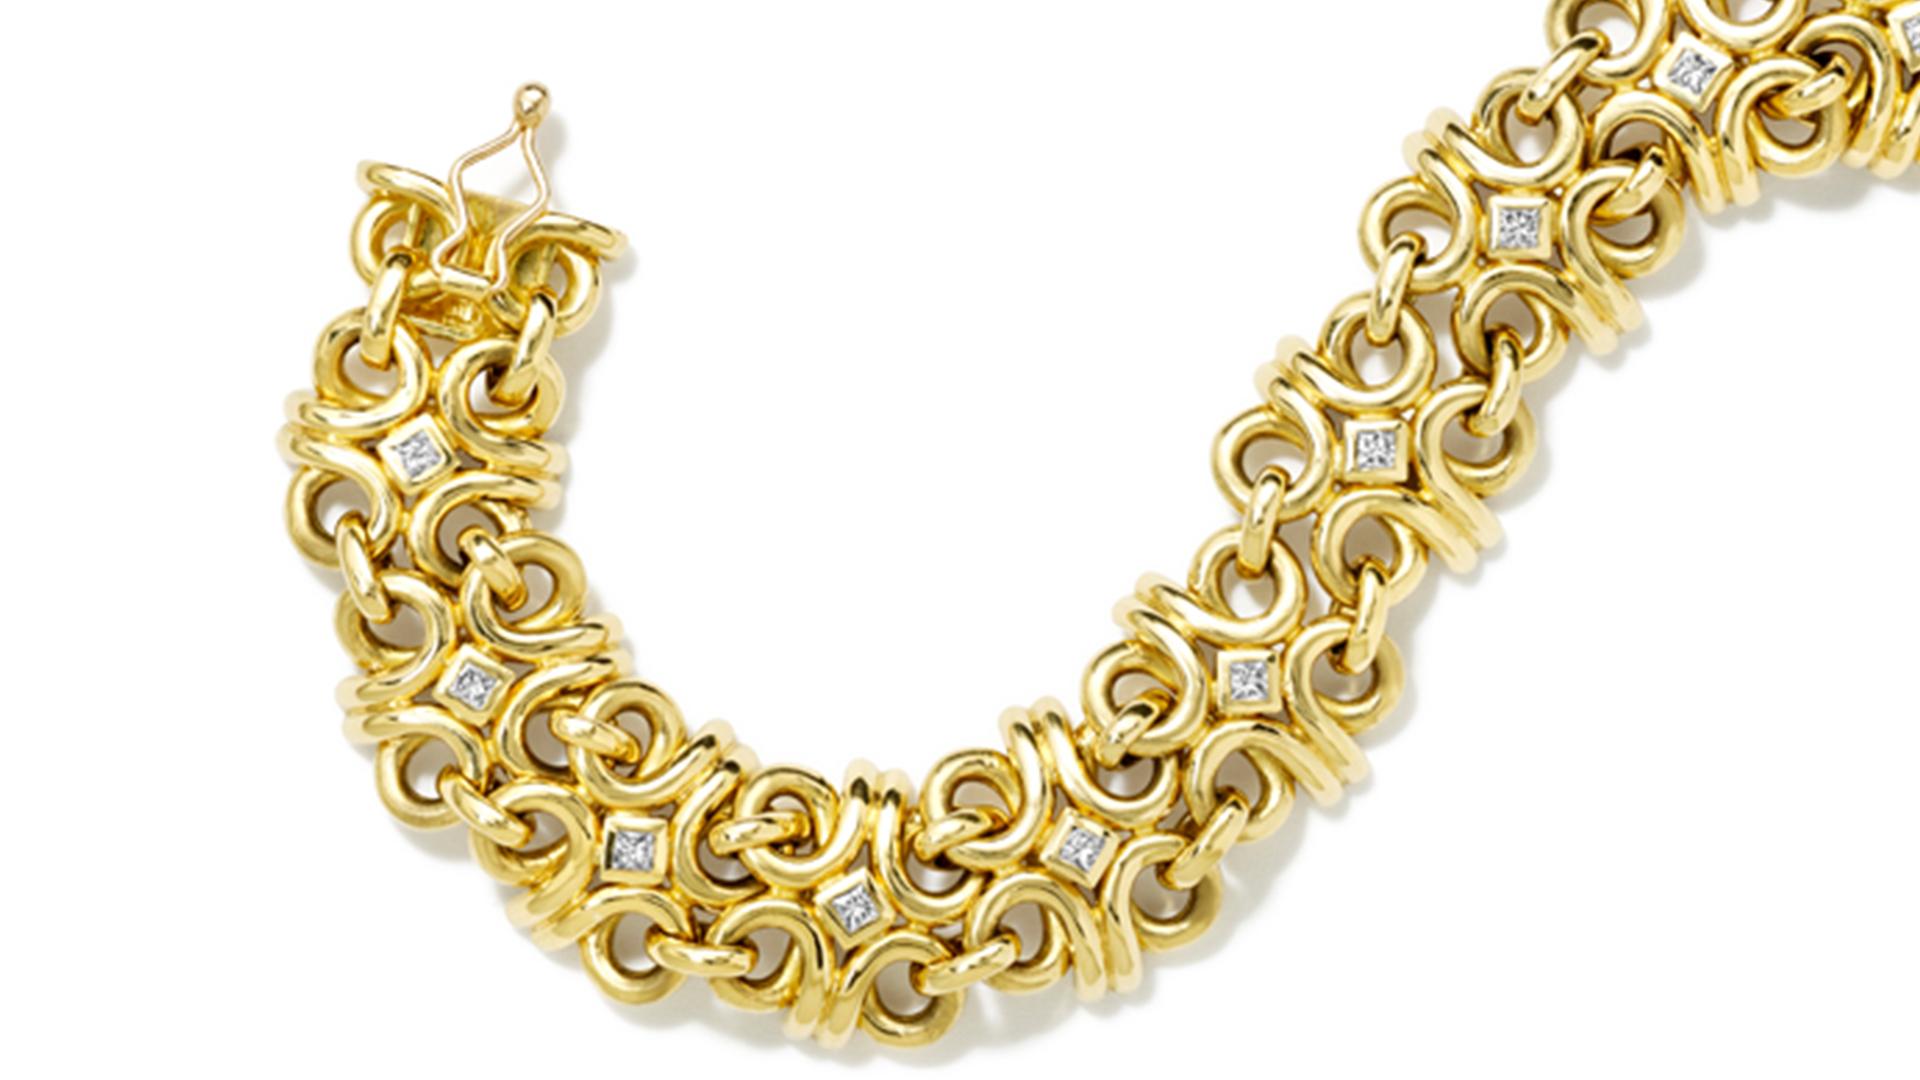 Beatrice 18 carat yellow gold and square cut diamond set bracelet. From Cassandra's Classic Collection.